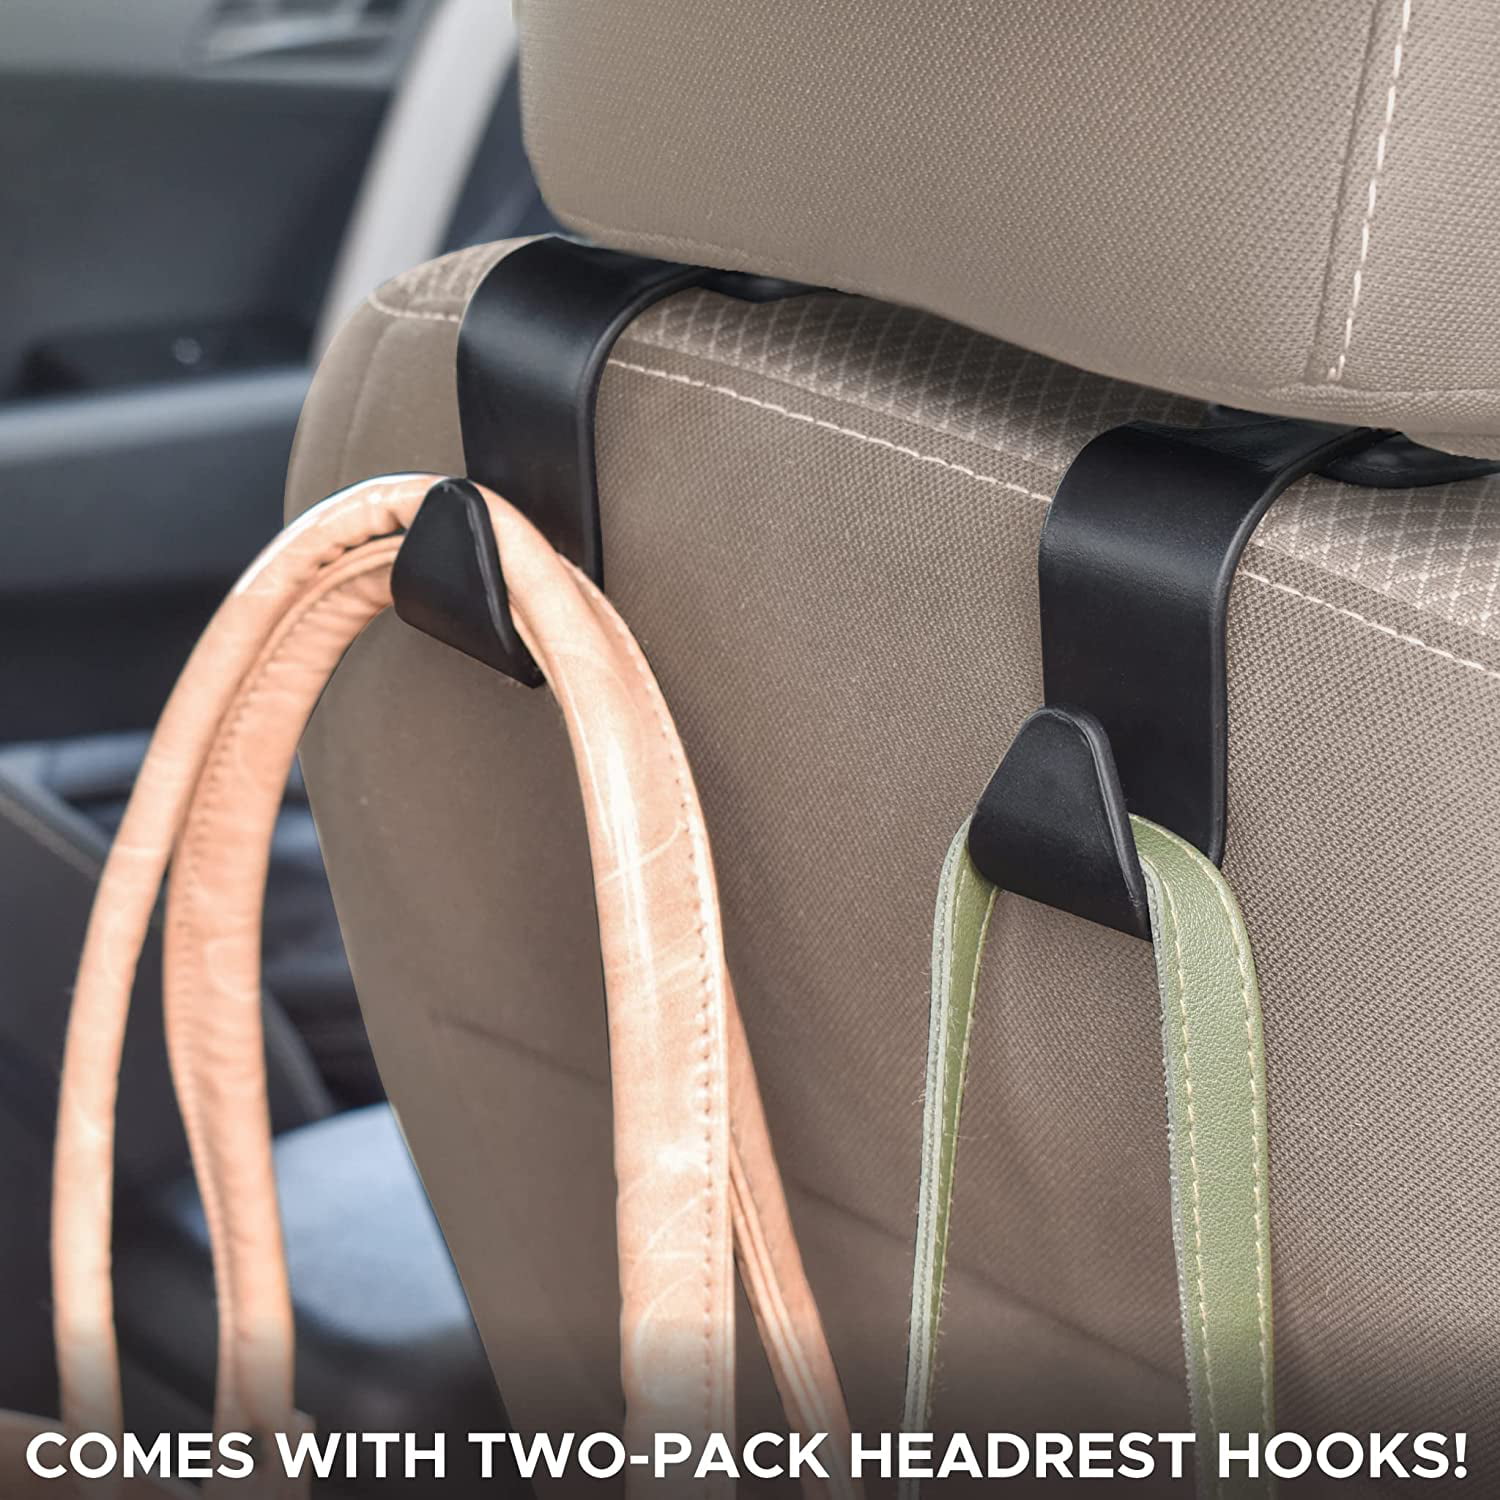 EcoNour Car Seat Gap Filler (2 Pack) | Universal for Car SUV Truck | Fills  The Gap Between Car Seat & Console, Stop Things from Dropping in Between